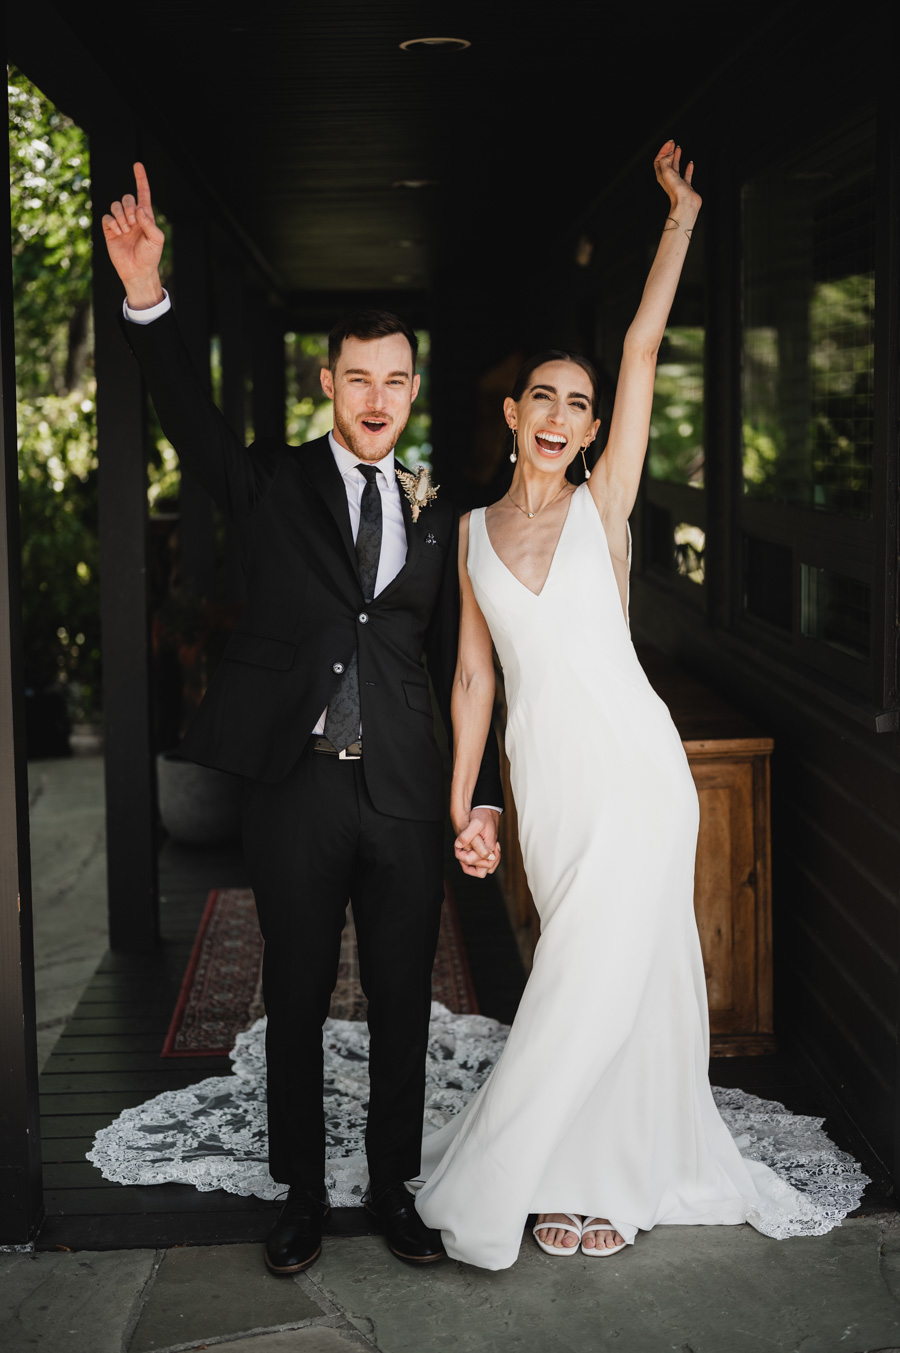 A portrait of newlyweds cheering during their wedding photographed by Portland wedding photographer Kyle Carnes.